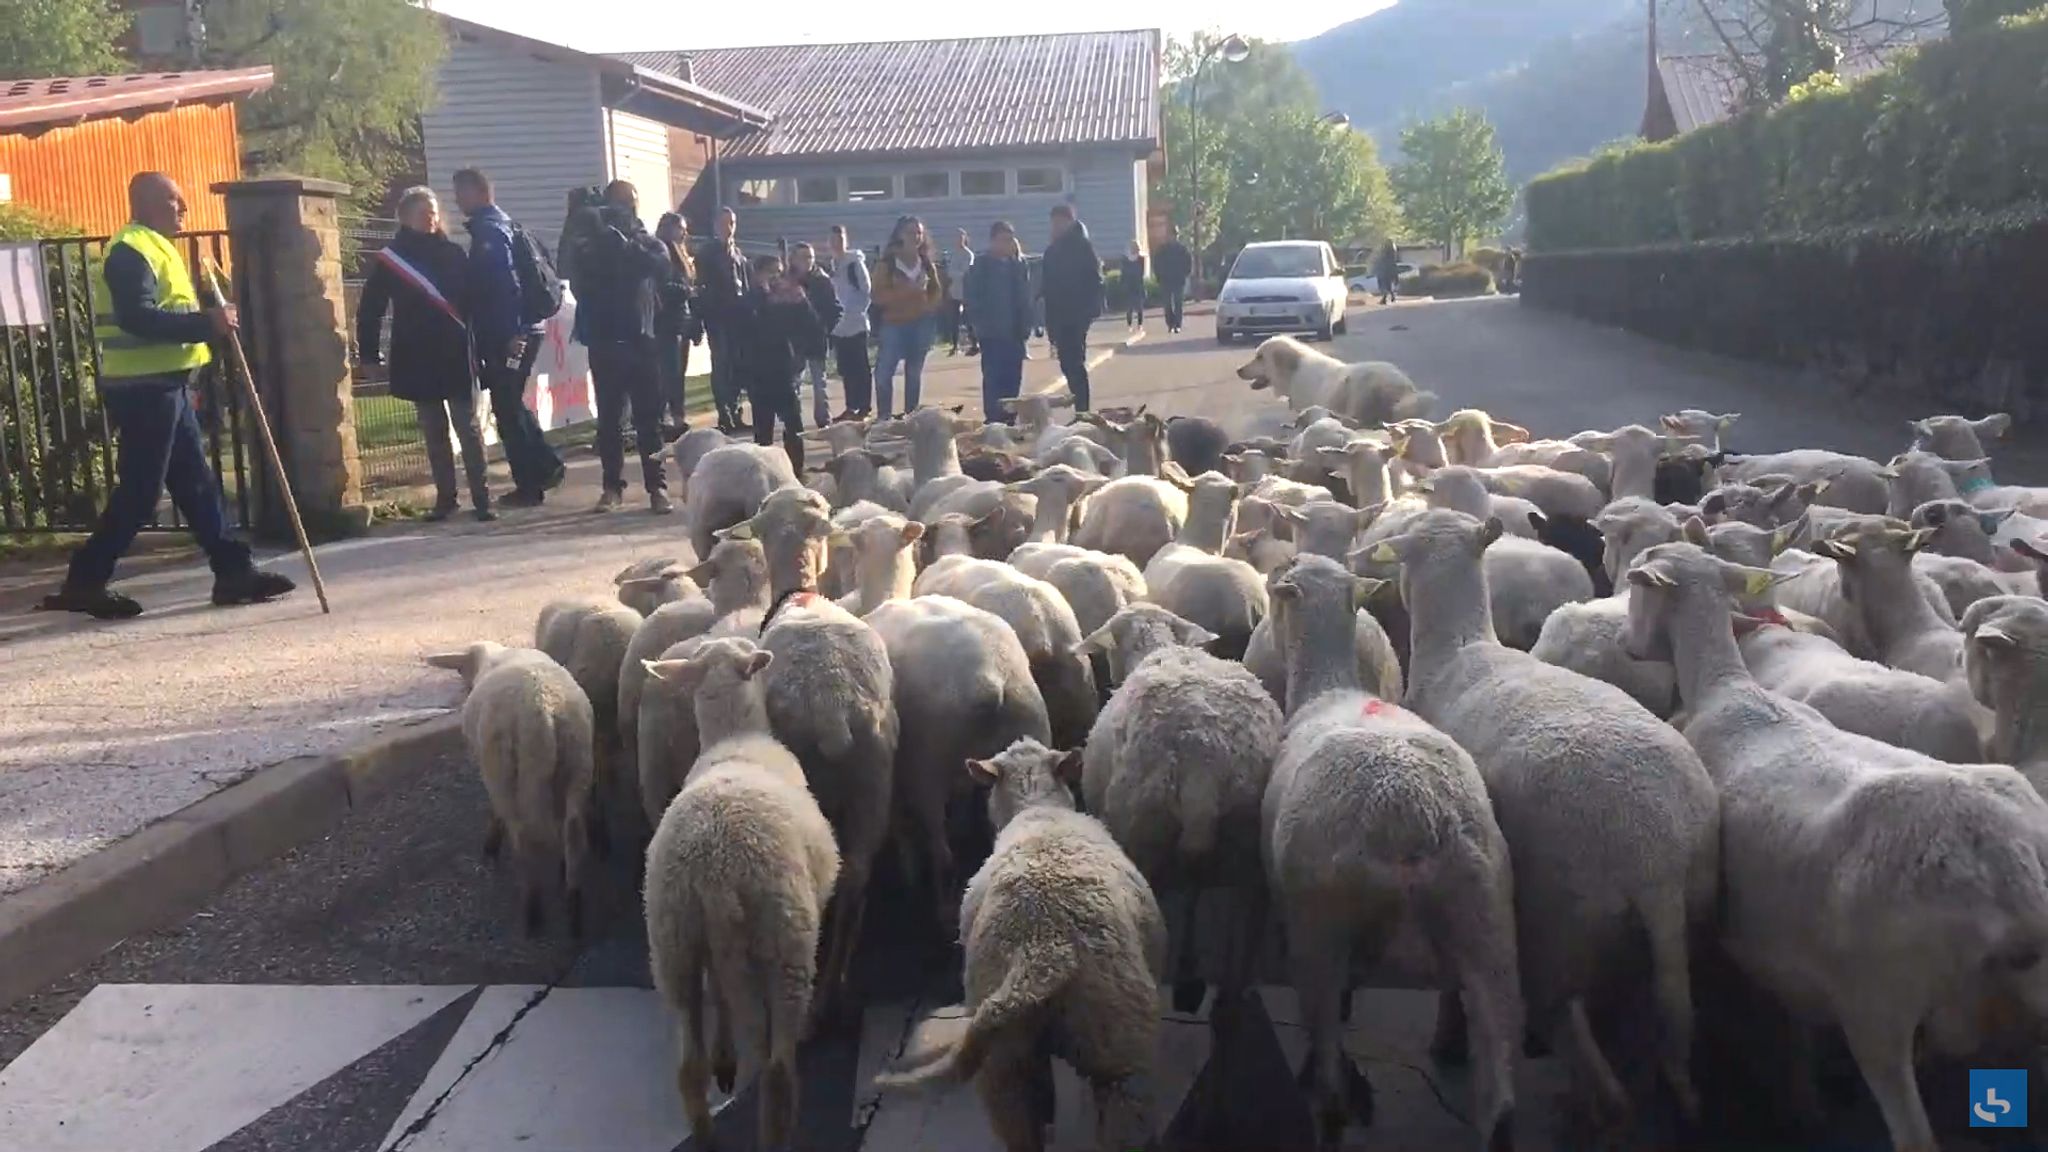 Sheep registered as pupils in bid to save classes at French Alps primary  school | Offbeat News | Sky News